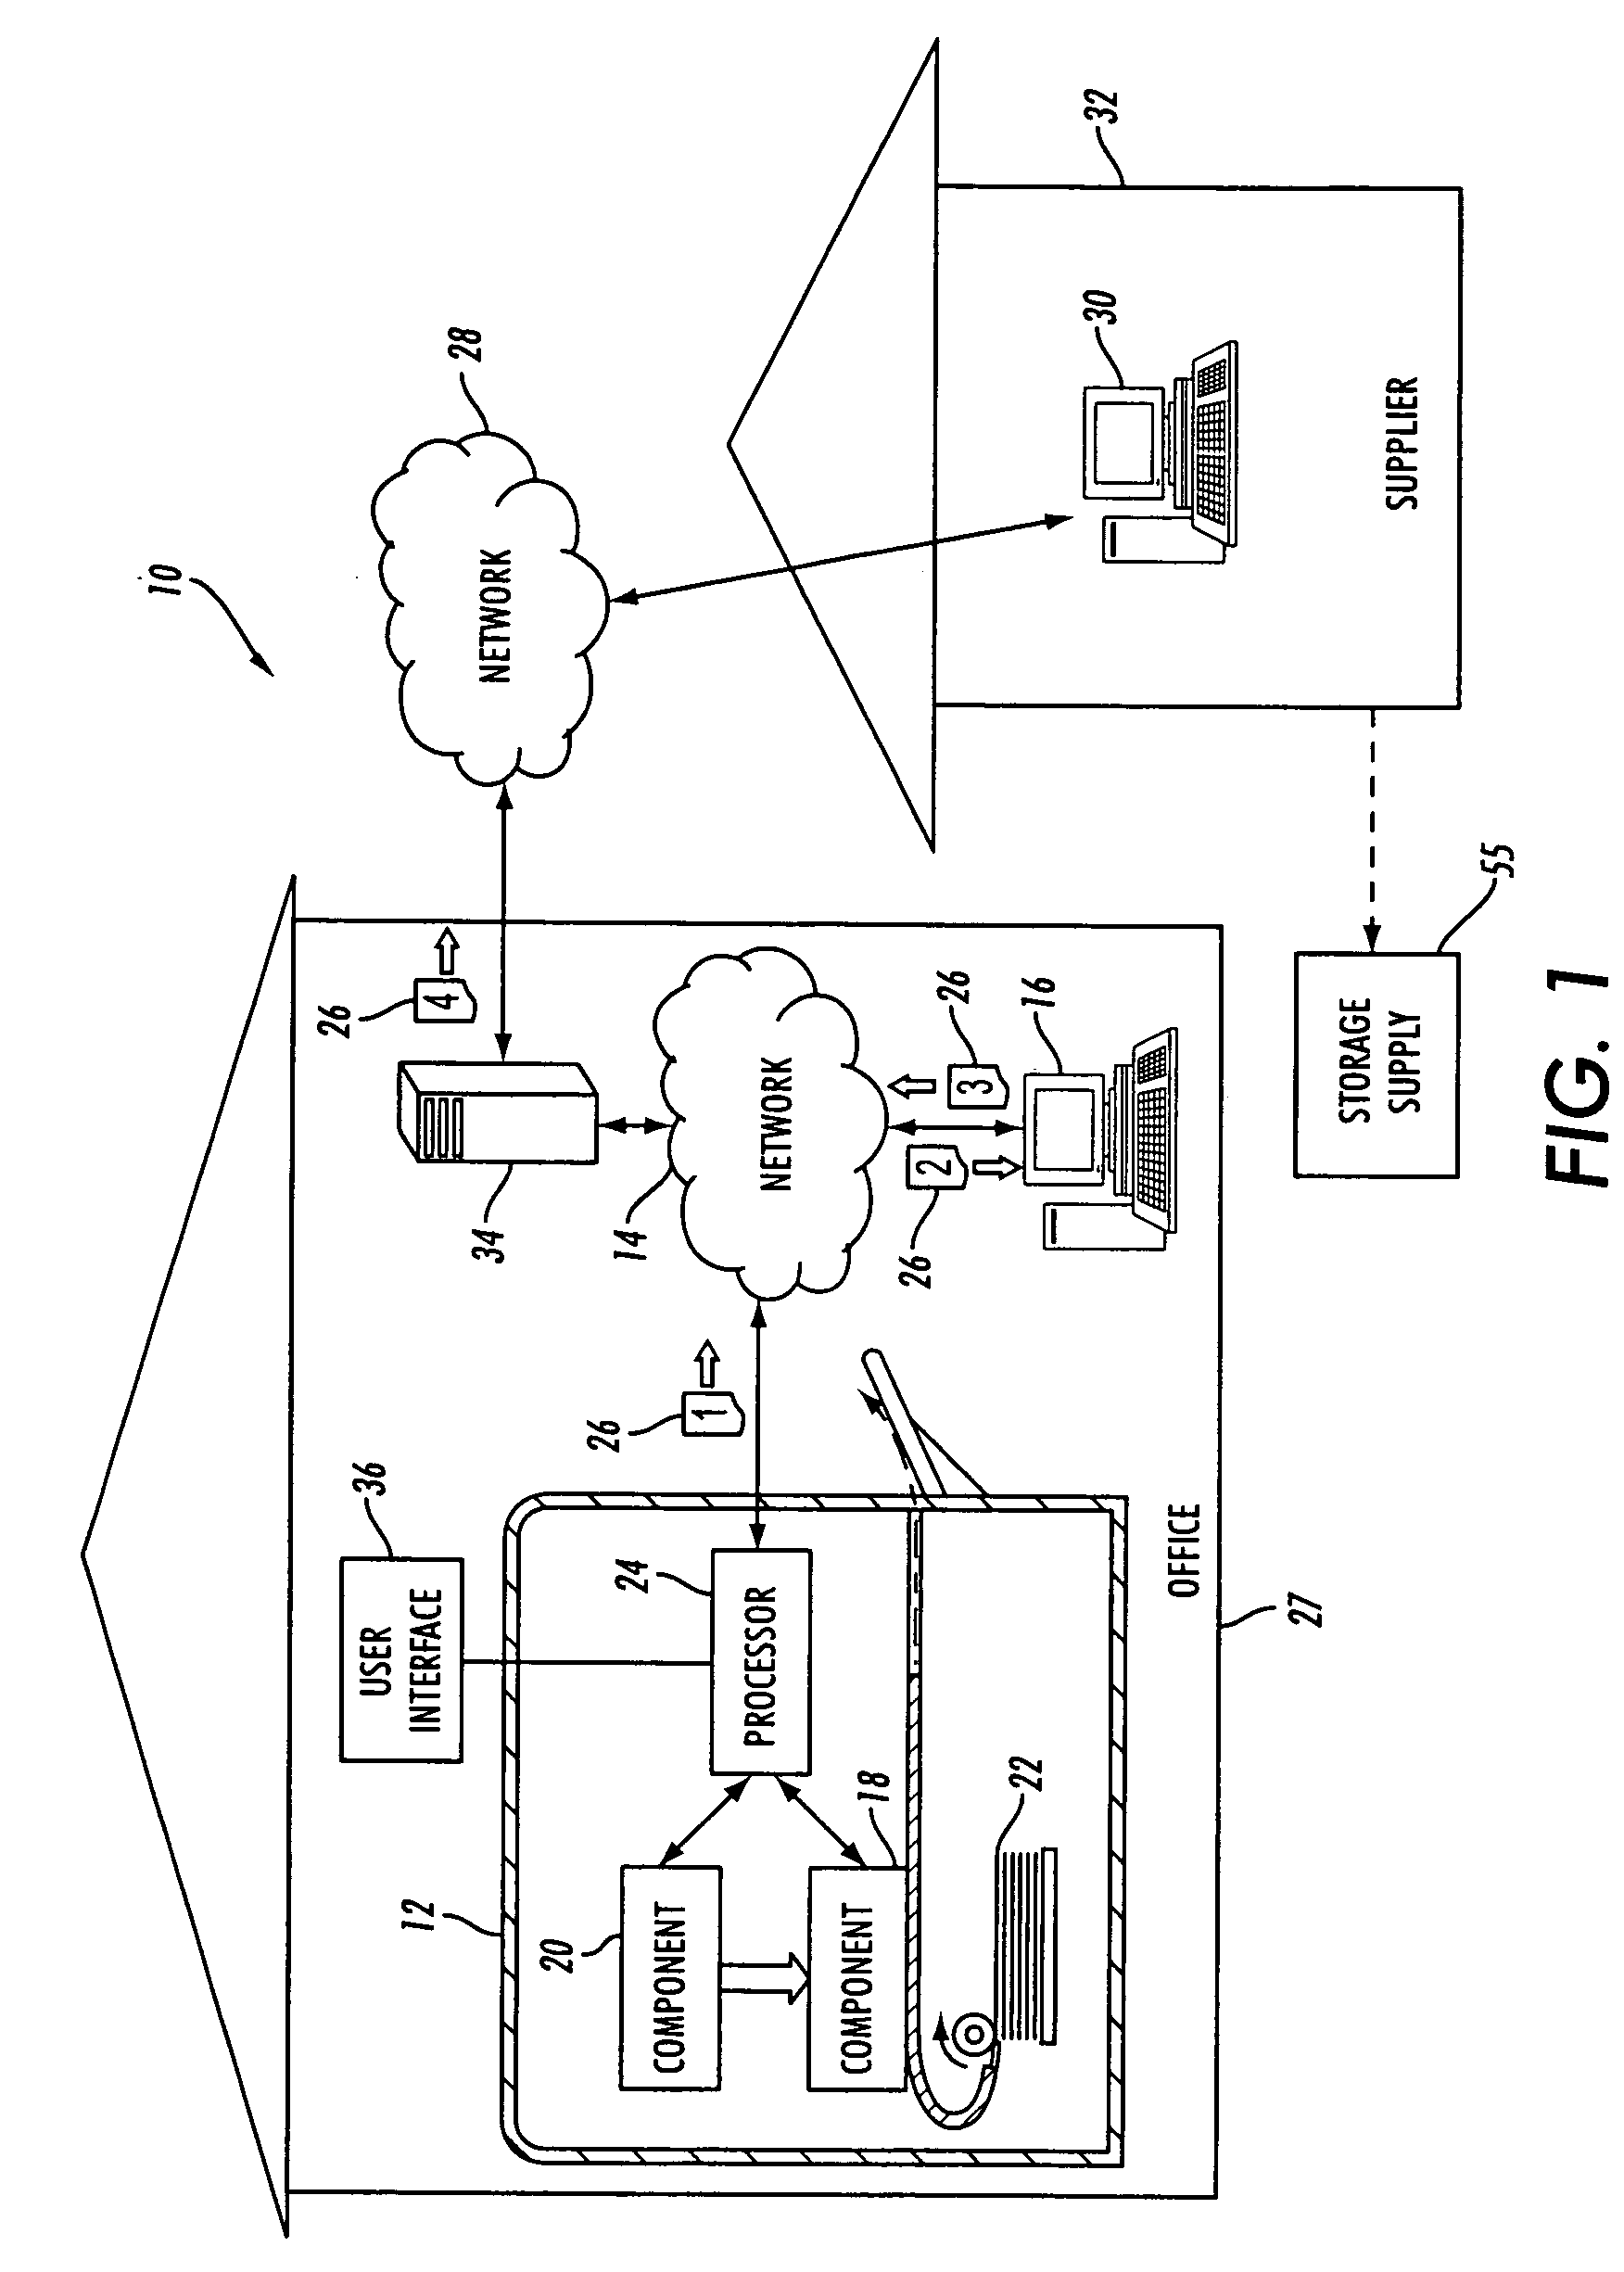 Automated detection and notification of the need for service and/or supplies replenishment in a machine